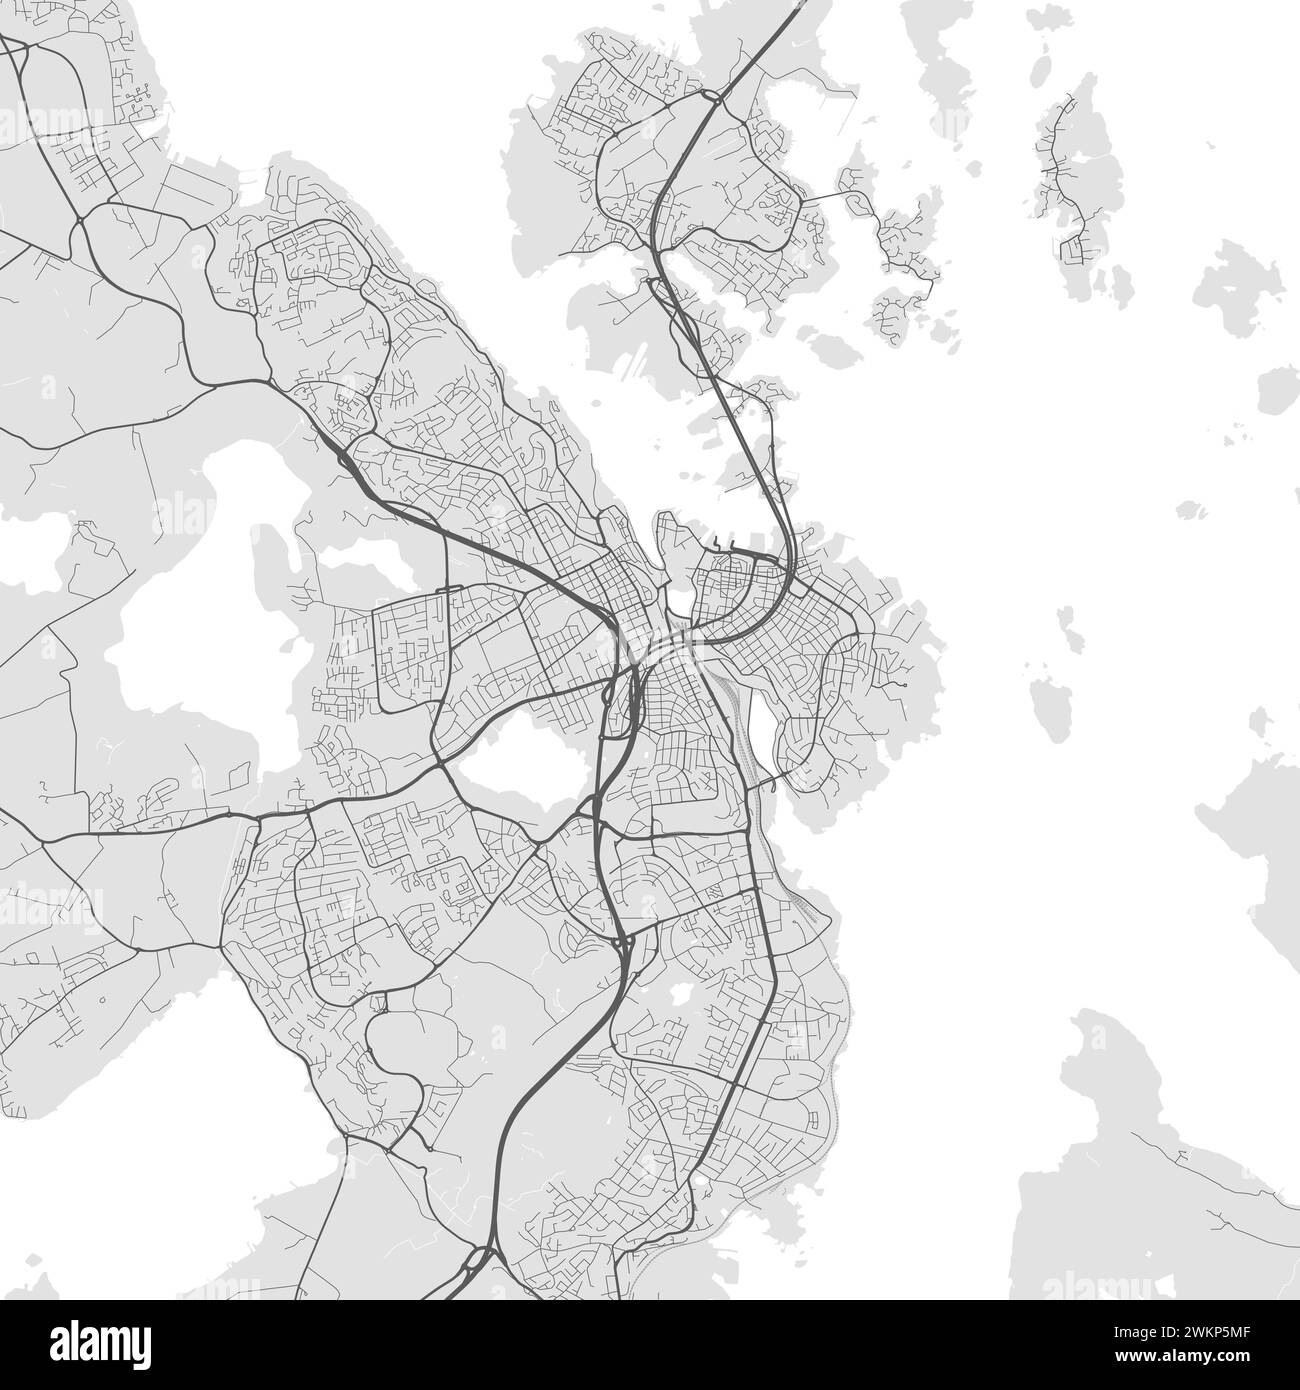 Stavanger map, Norway. Grayscale color city map, vector streetmap with roads and rivers. Stock Vector